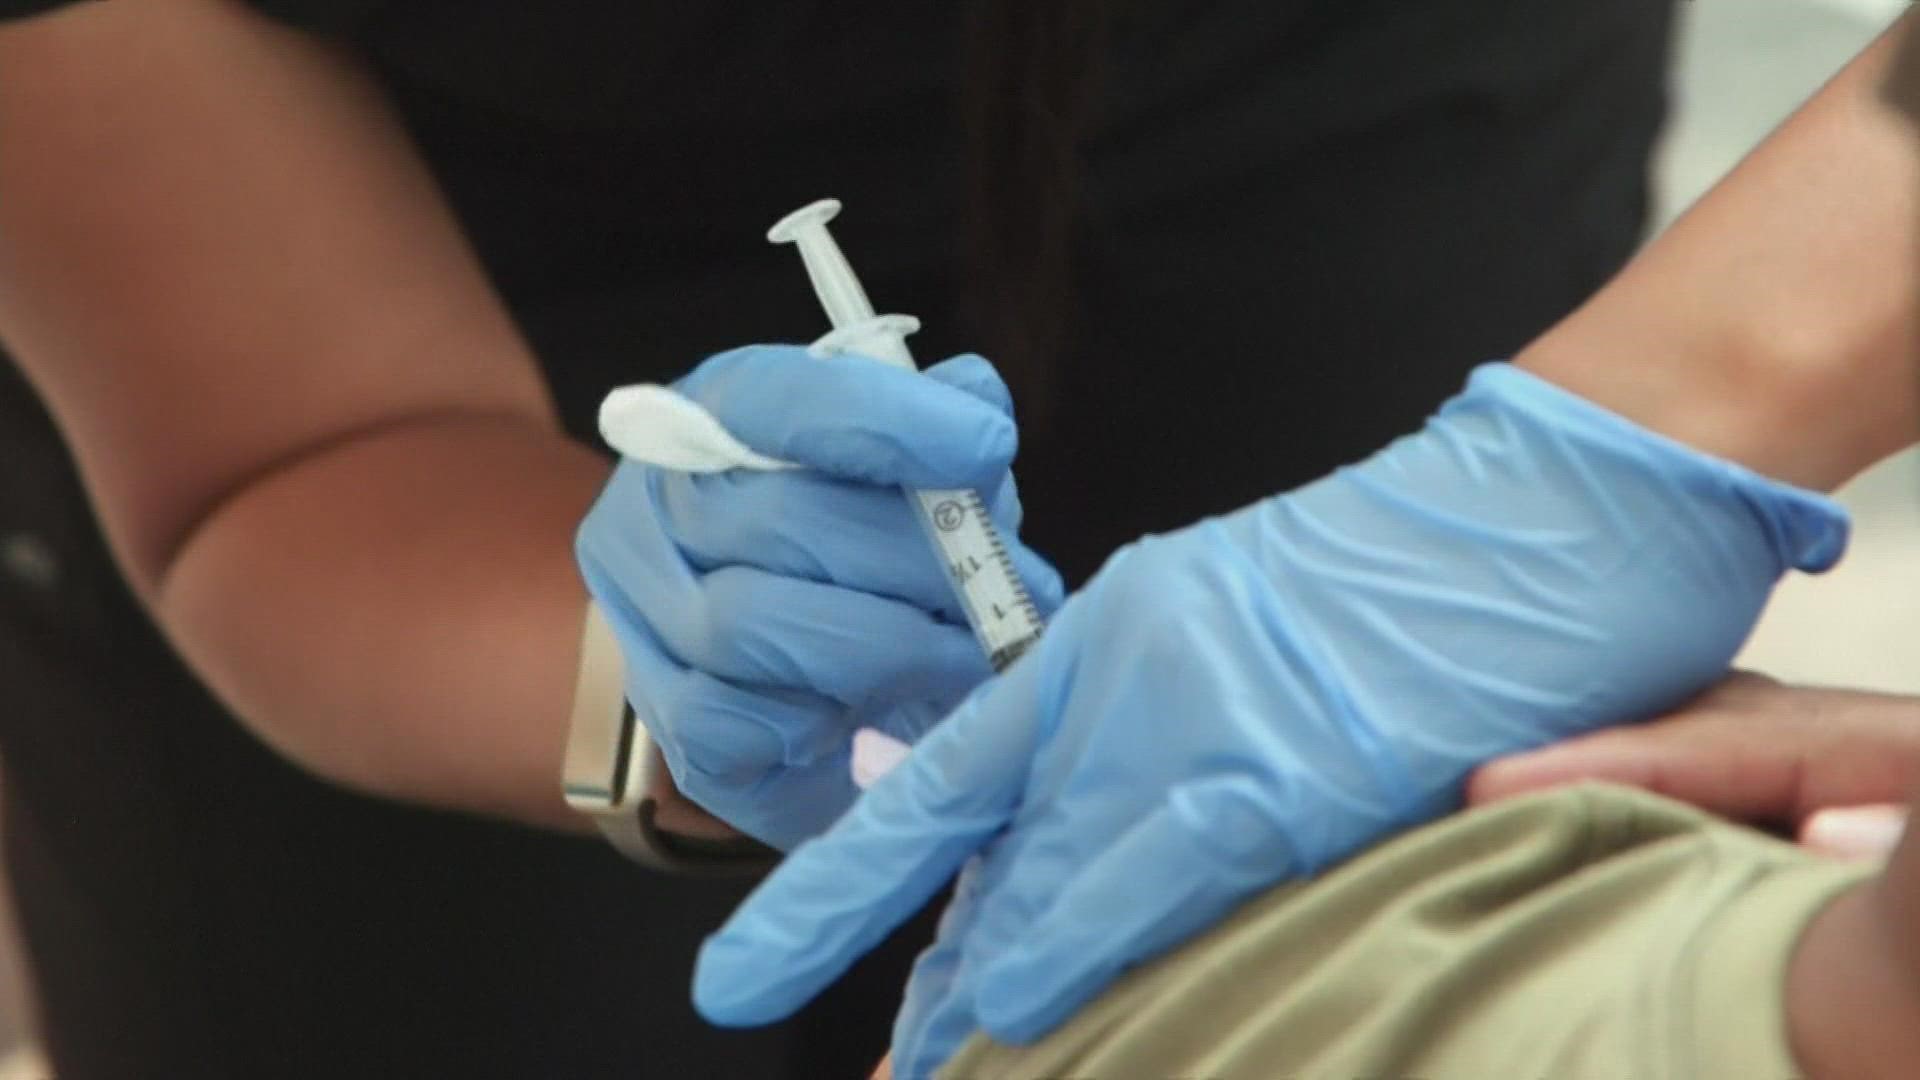 Several locations across east Tennessee offered free flu shots, like the Haslam Sansom Ministry Complex in Lonsdale is still offering the vaccines until 6:30 p.m.